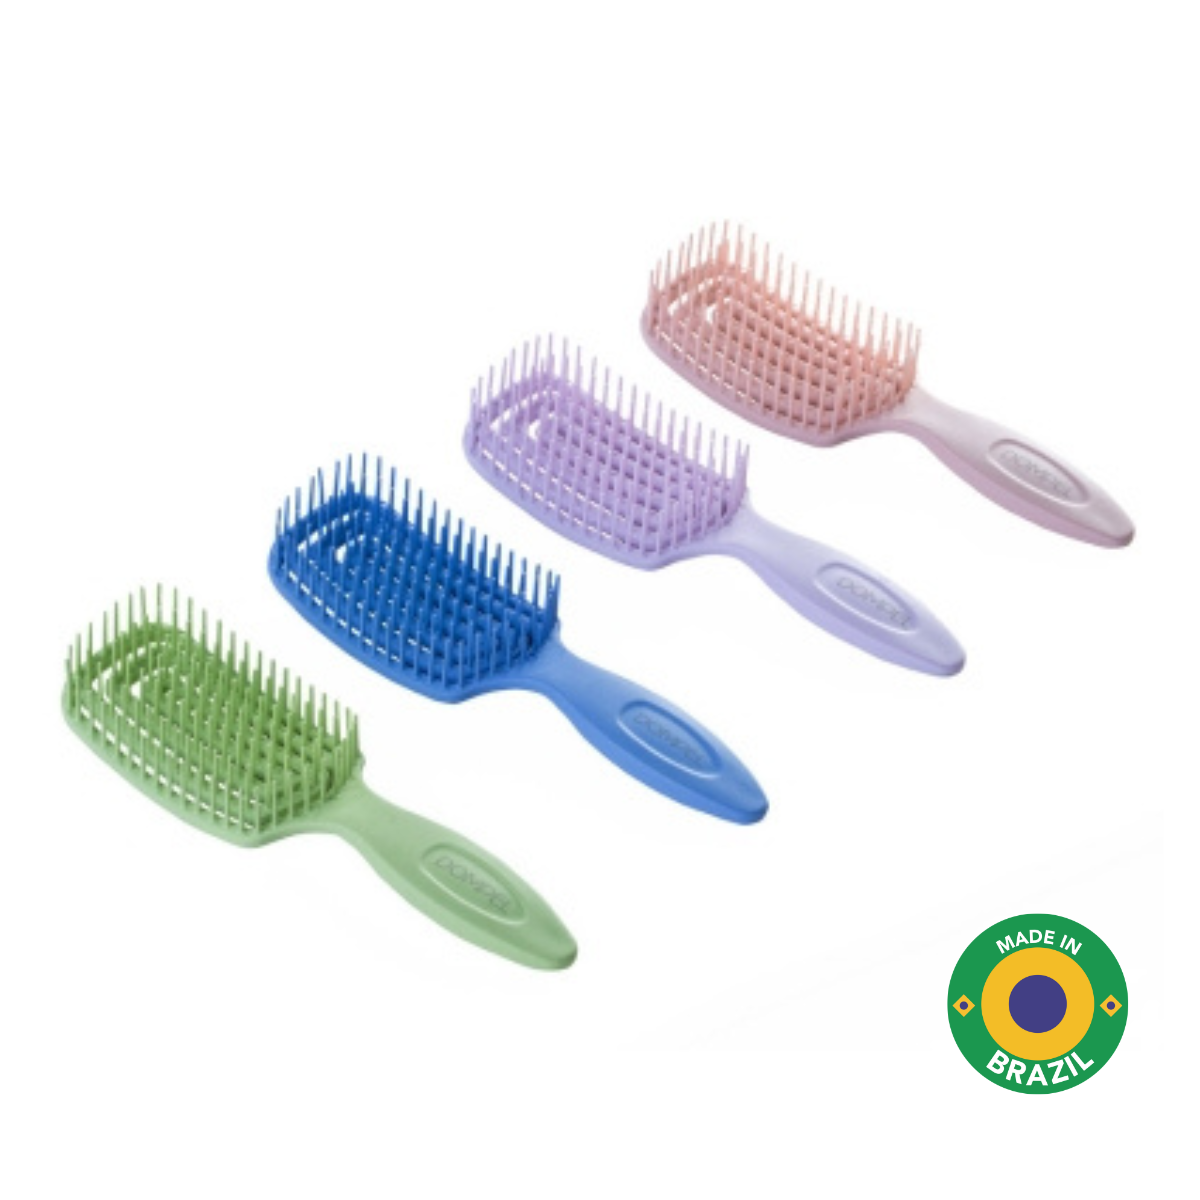 Dompel Hair Brush Inca – Set of 4 Detangling Brushes for Hair Extensions, Prevents Snagging on Tape, Keratin, Microlink, and Weft Bases – Colors Lilac, Rosé, Green, Blue